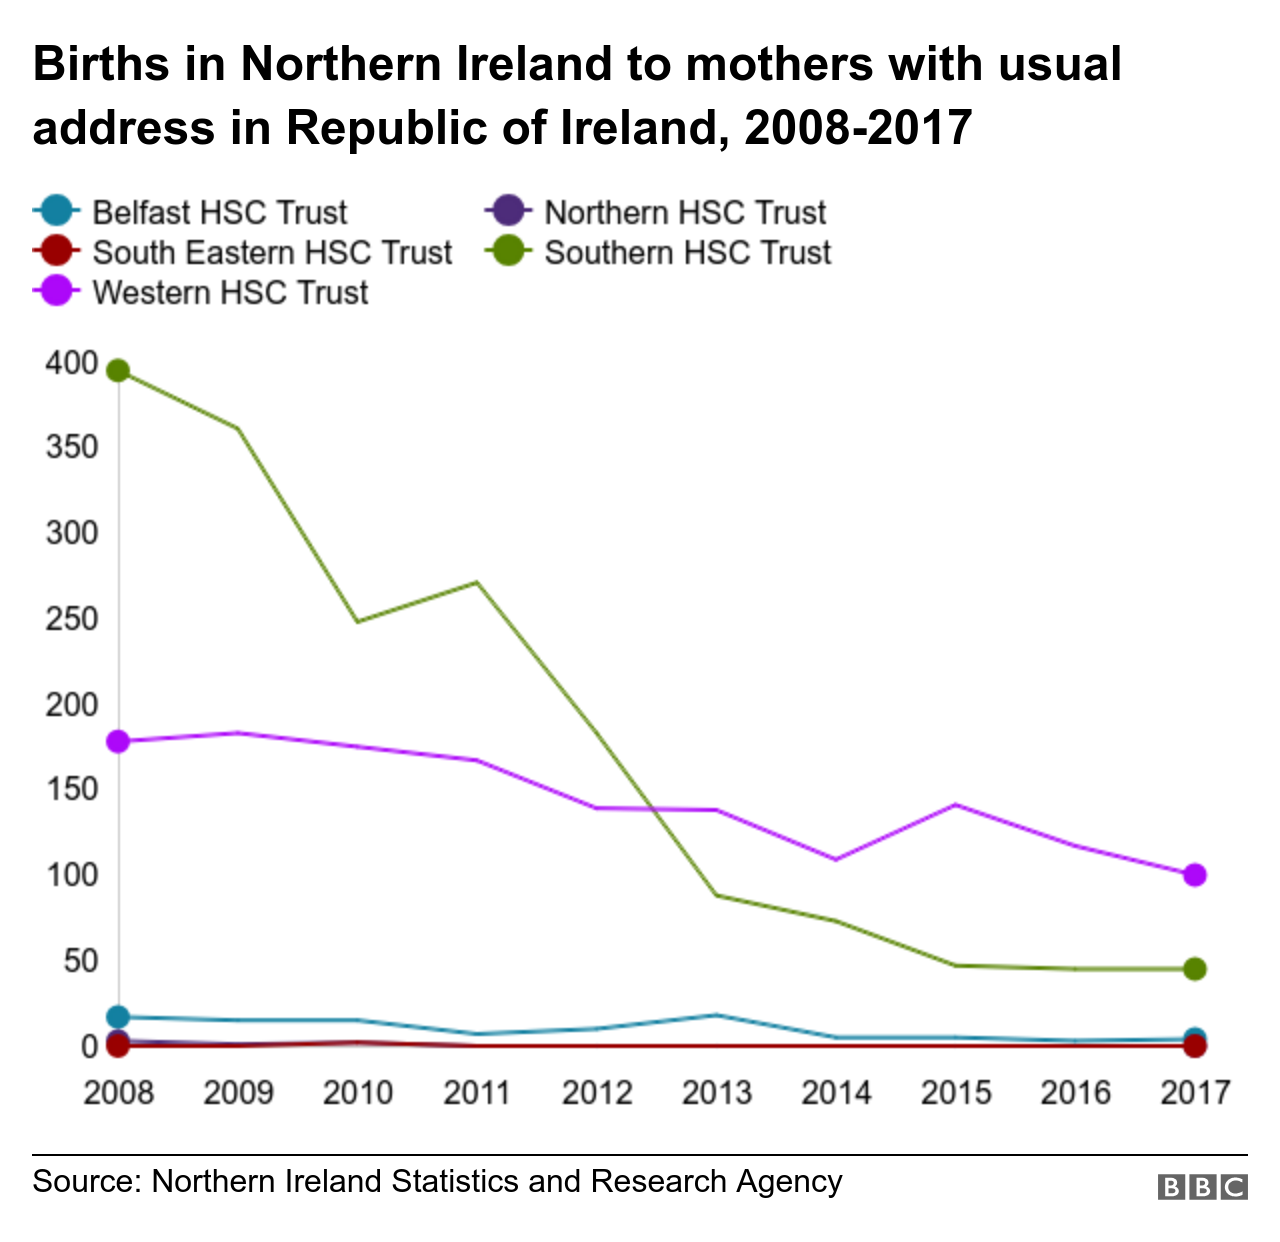 Graph showing number of births in Northern Ireland to mothers with addresses in the Republic of Ireland